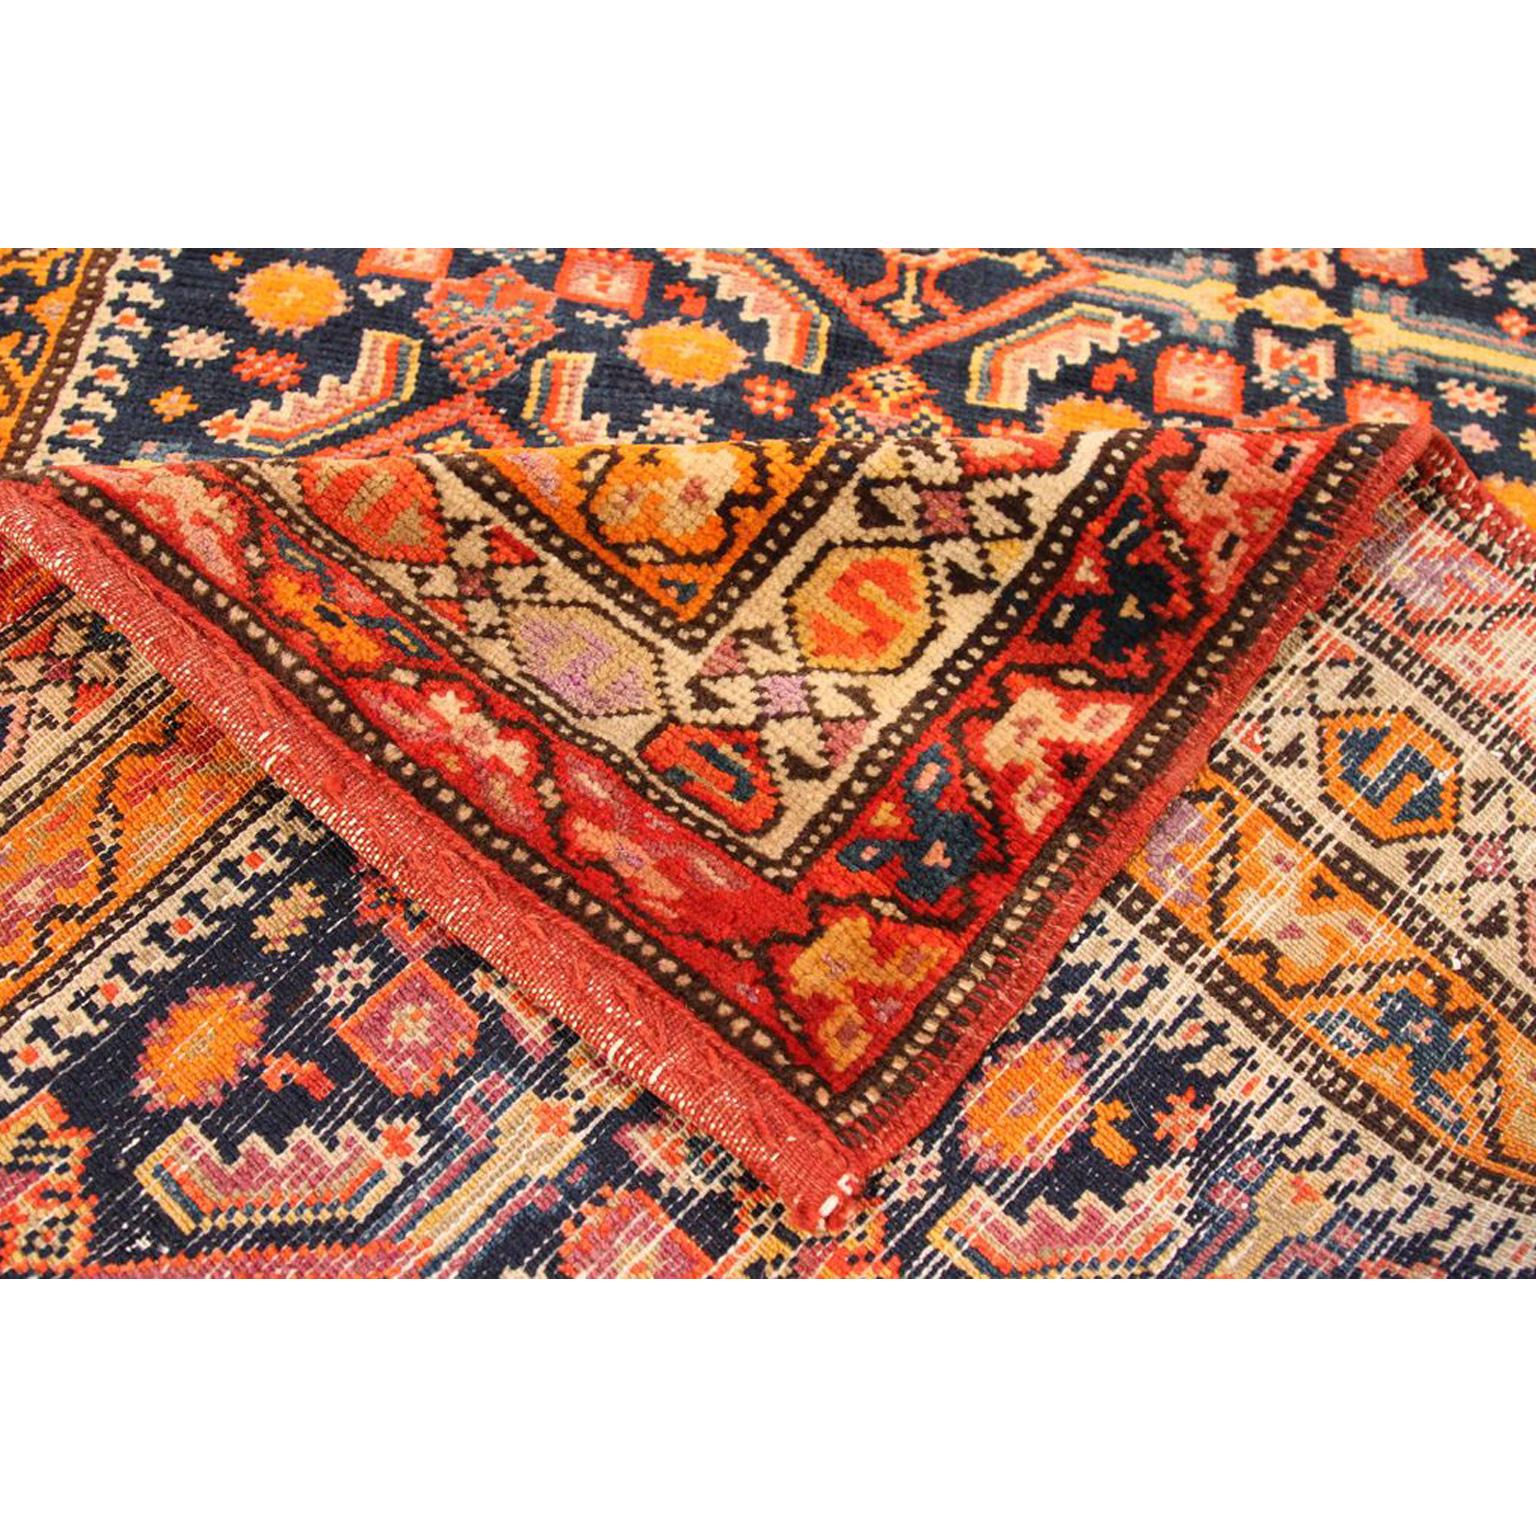 Unknown 1910s Antique Persian Rug Azerbaijan Style with Fine Floral and Geometric Design For Sale